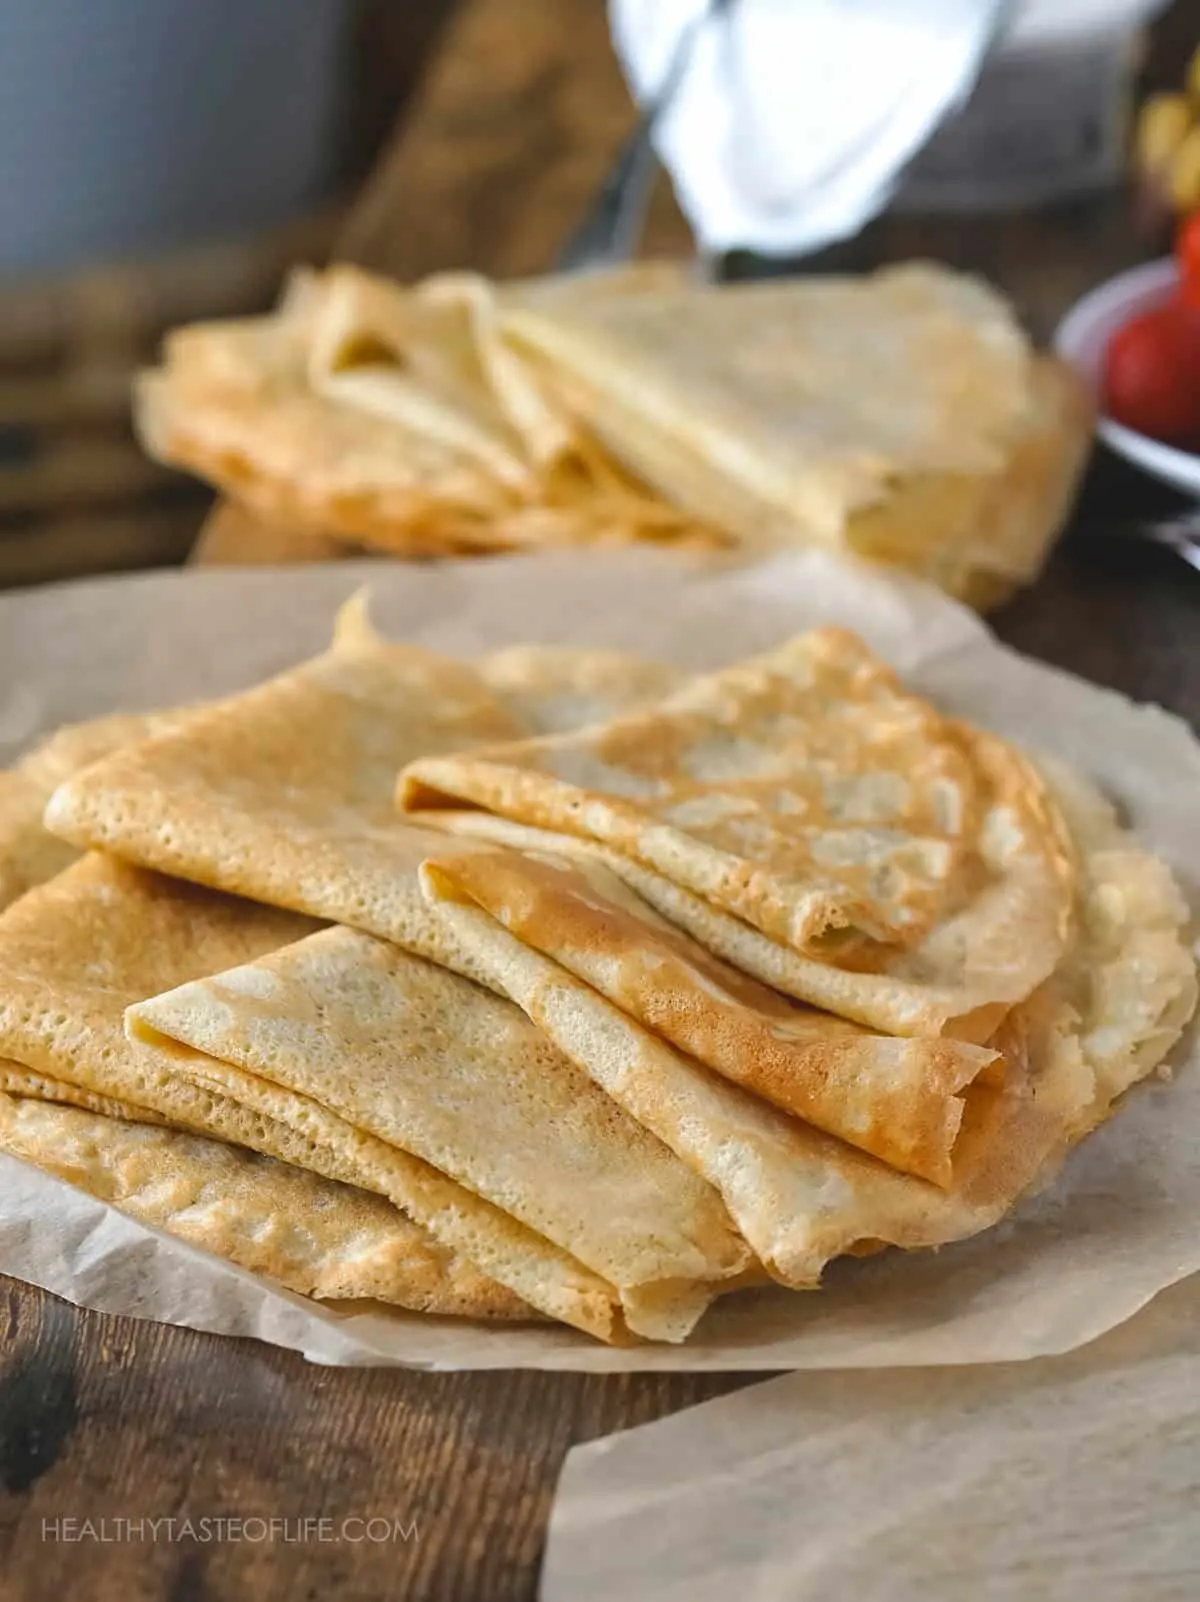 Gluten free dairy free crepes made in a blender served sweet or savory.